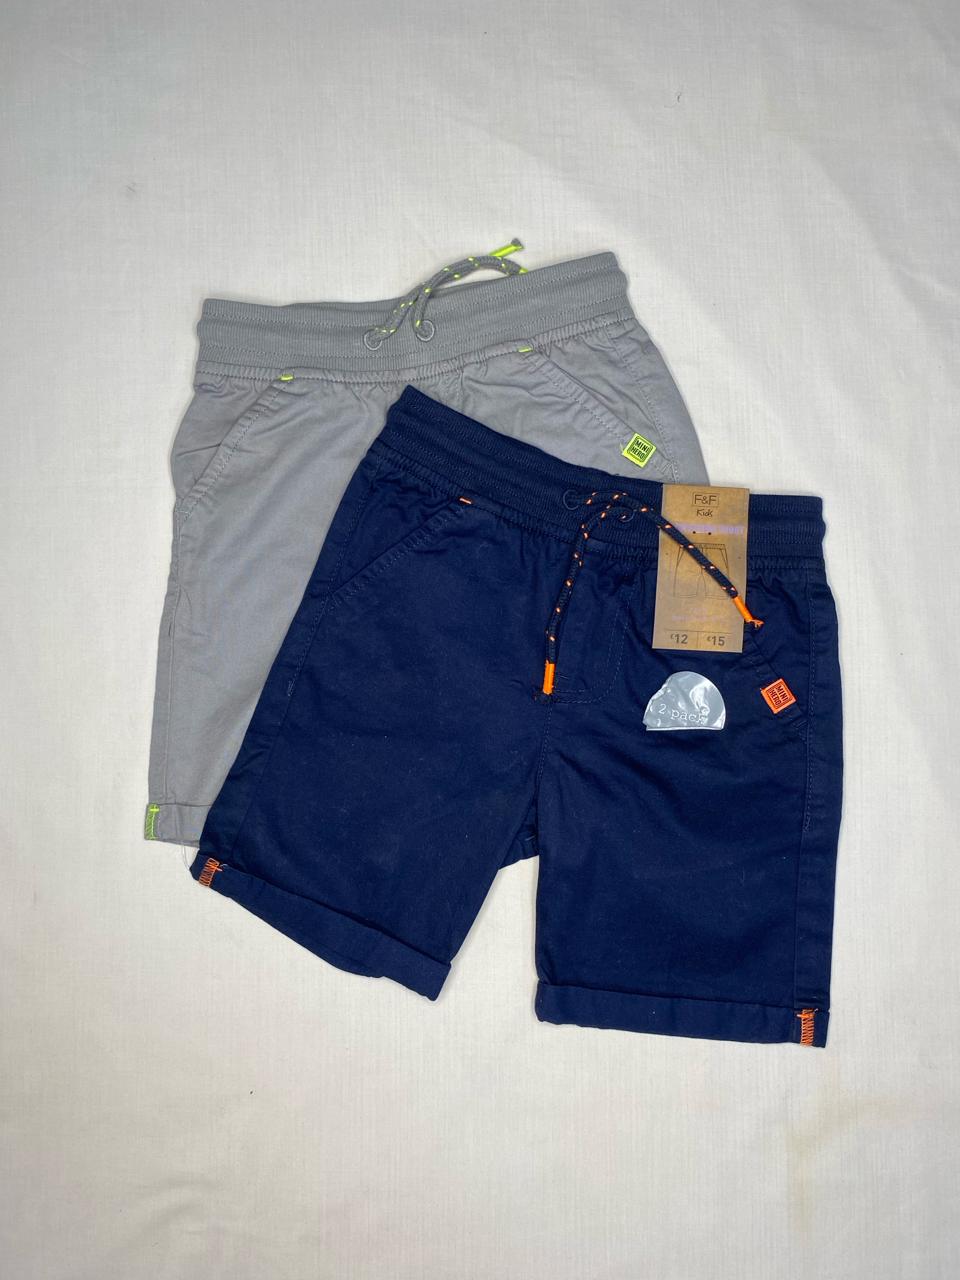 100% cotton pack of 2 shorts